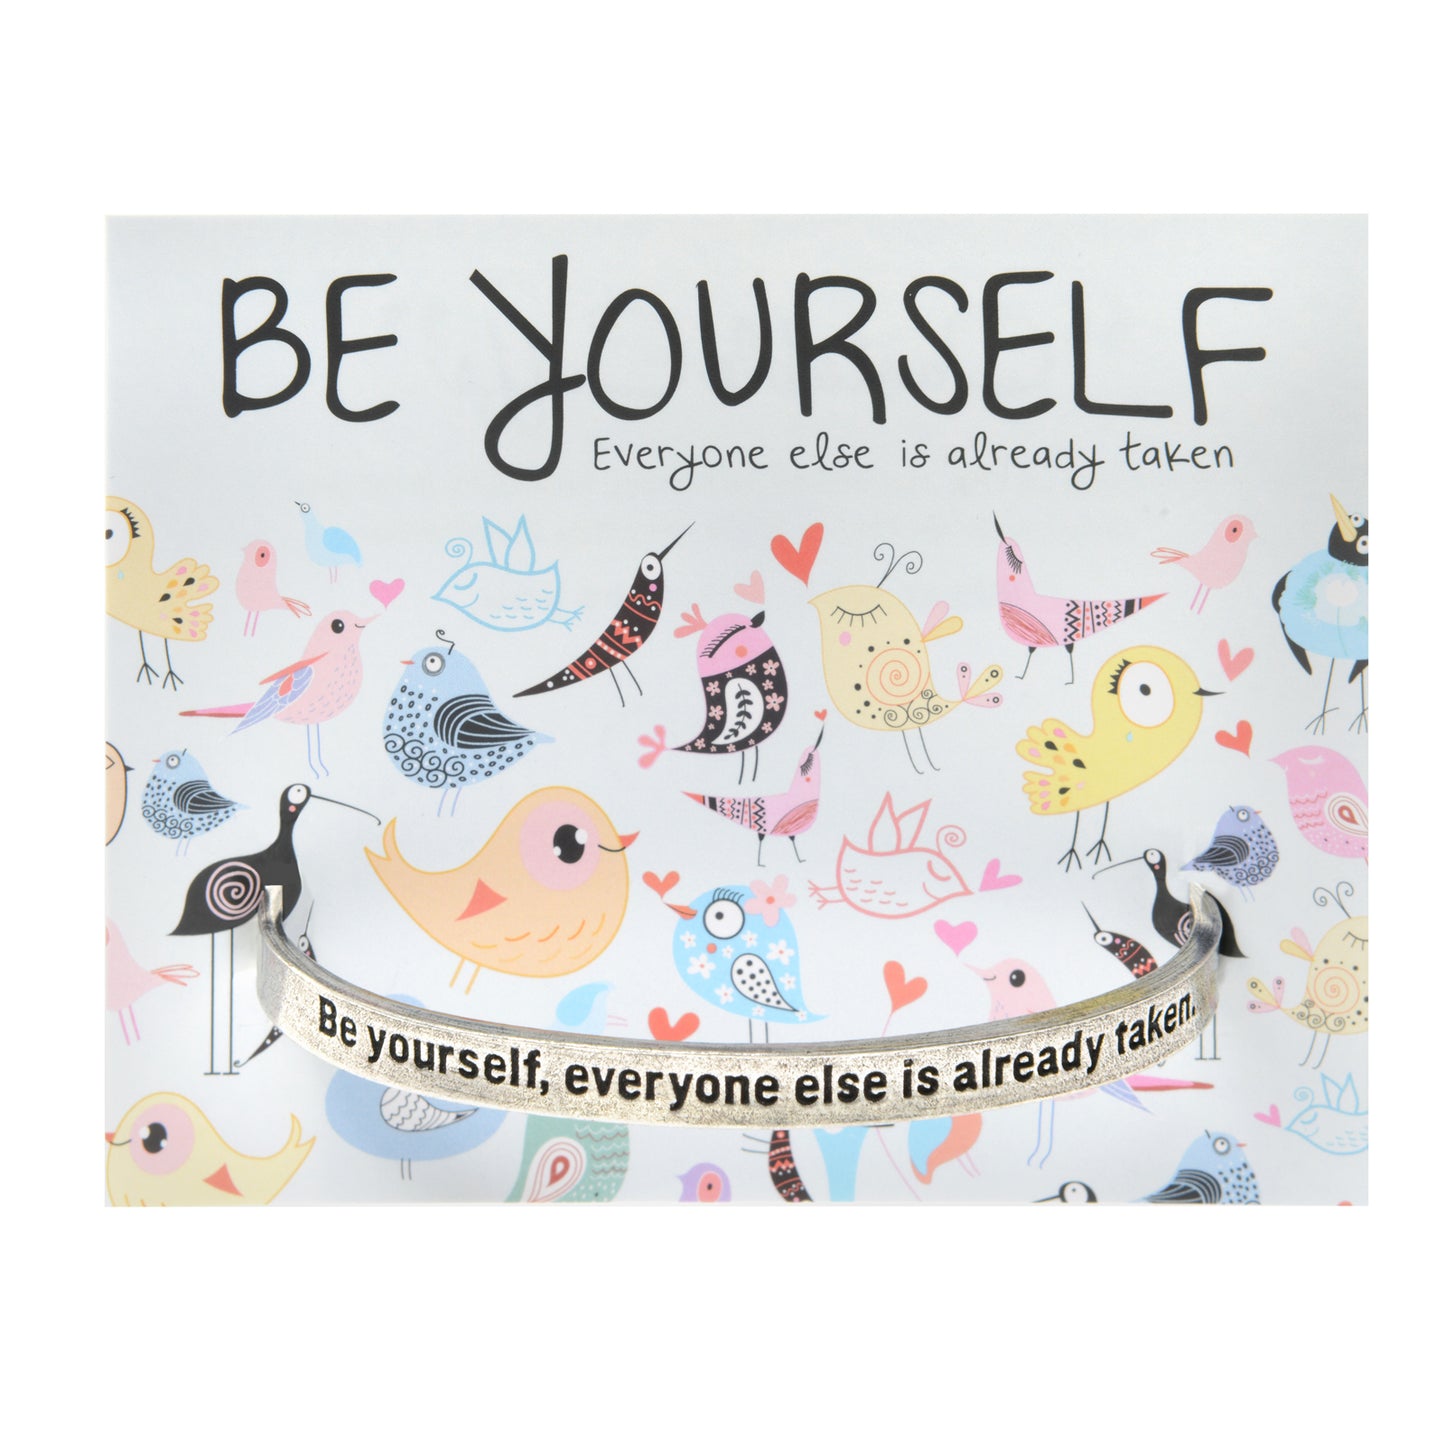 Be Yourself, Everyone Else is Already Taken Quotable Cuff Bracelet on backer card